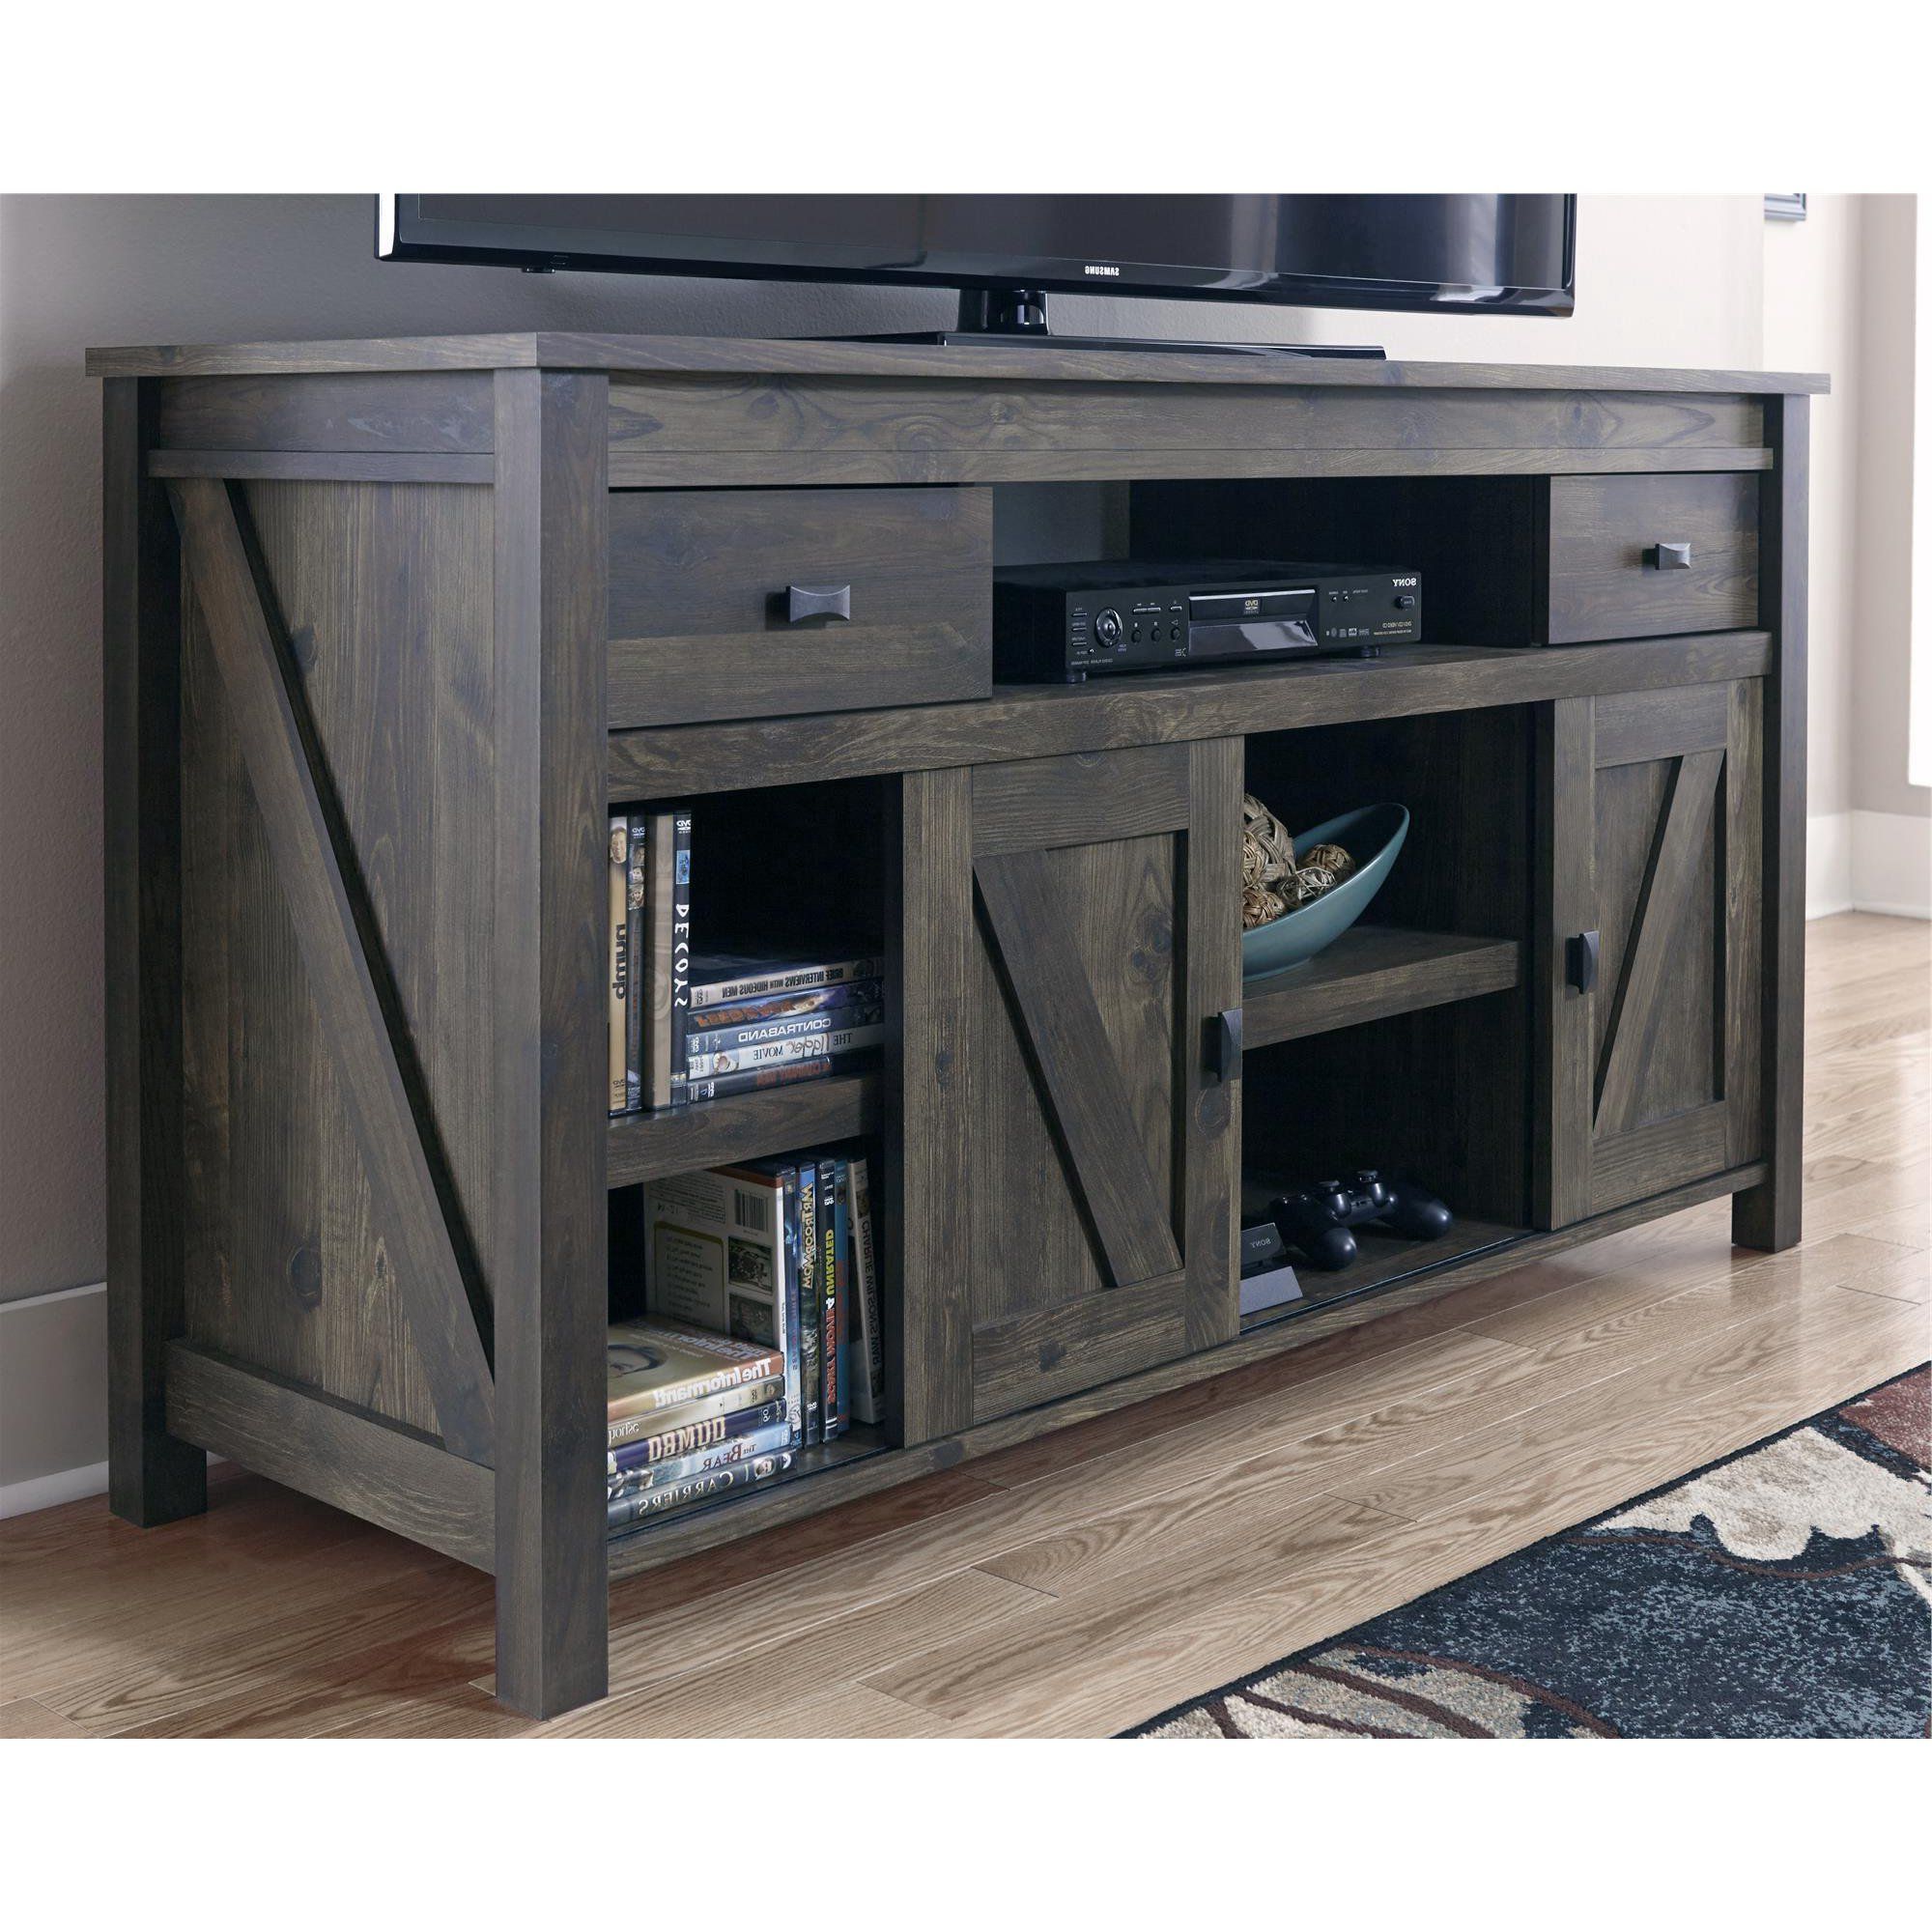 Woven Paths Scandi Farmhouse Tv Stand For Tvs Up To 60 In Woven Paths Farmhouse Barn Door Tv Stands In Multiple Finishes (View 18 of 20)